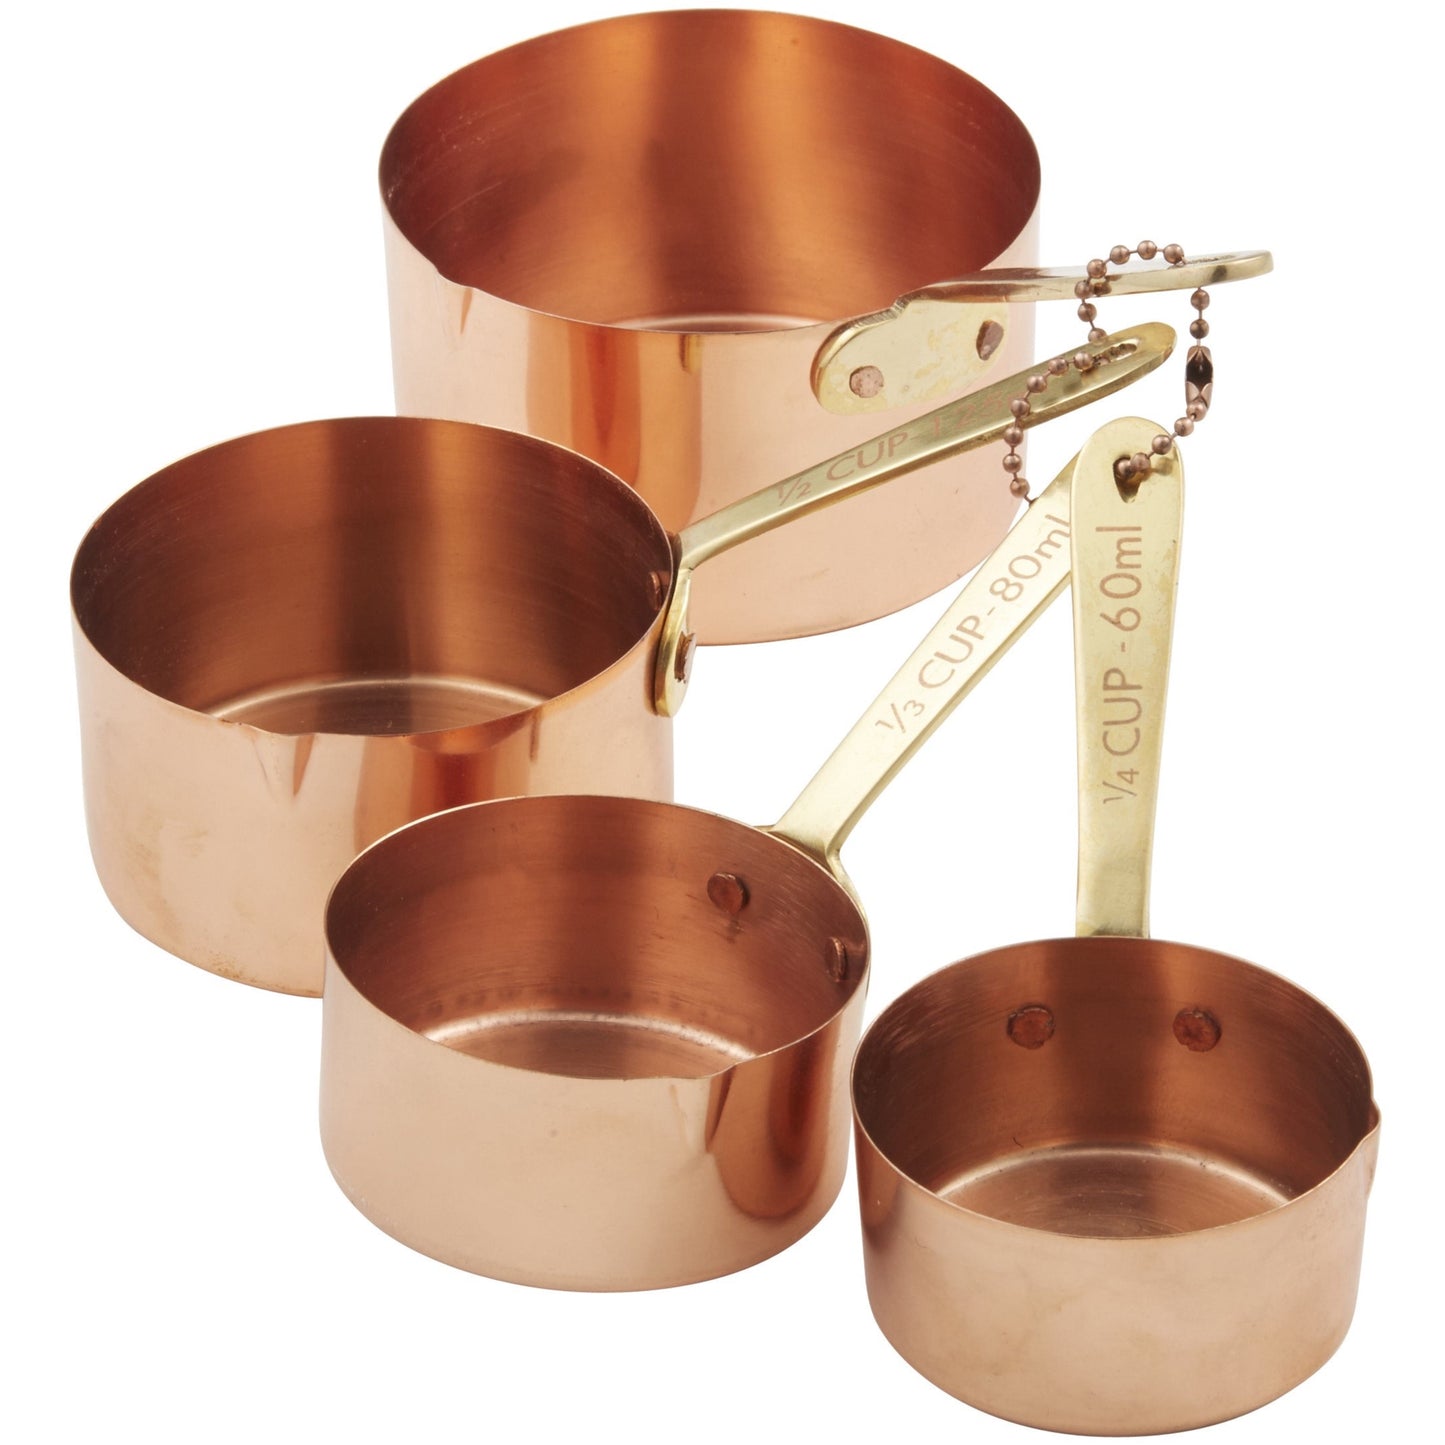 Copper Measuring Cups with Brass Handles